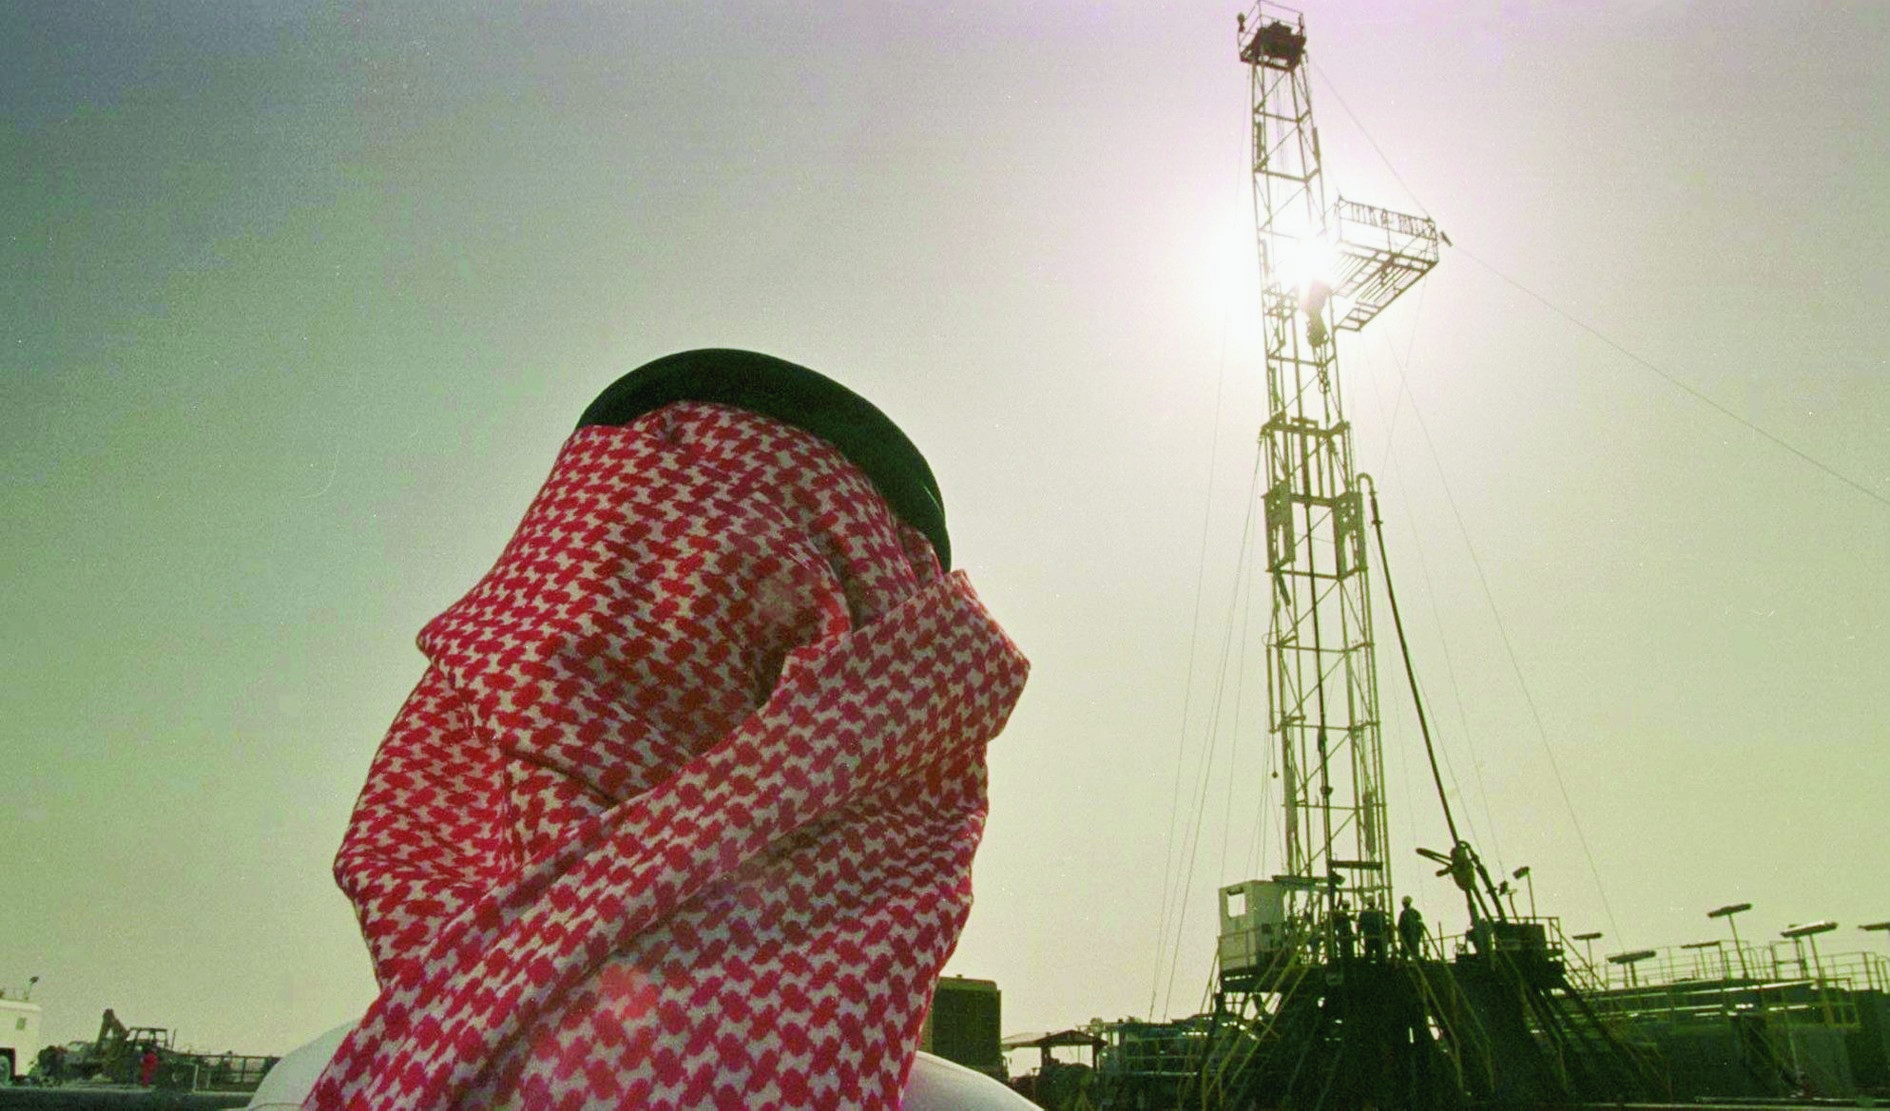 Khaled al Otaiby, an official of the Saudi oil  company Aramco watches progress at a rig at the al-Howta oil field near Howta, Saudi Arabia, on Feb. 26, 1997. Oil prices surged close to dollar42 a barrel Monday, May 17, 2004,  as markets shrugged off a Saudi proposal that OPEC raise its official output target by 6 percent. (KEYSTONE/AP Photo/John Moore) SAUDI ARABIEN OEL BOHRTURM ARAMCO